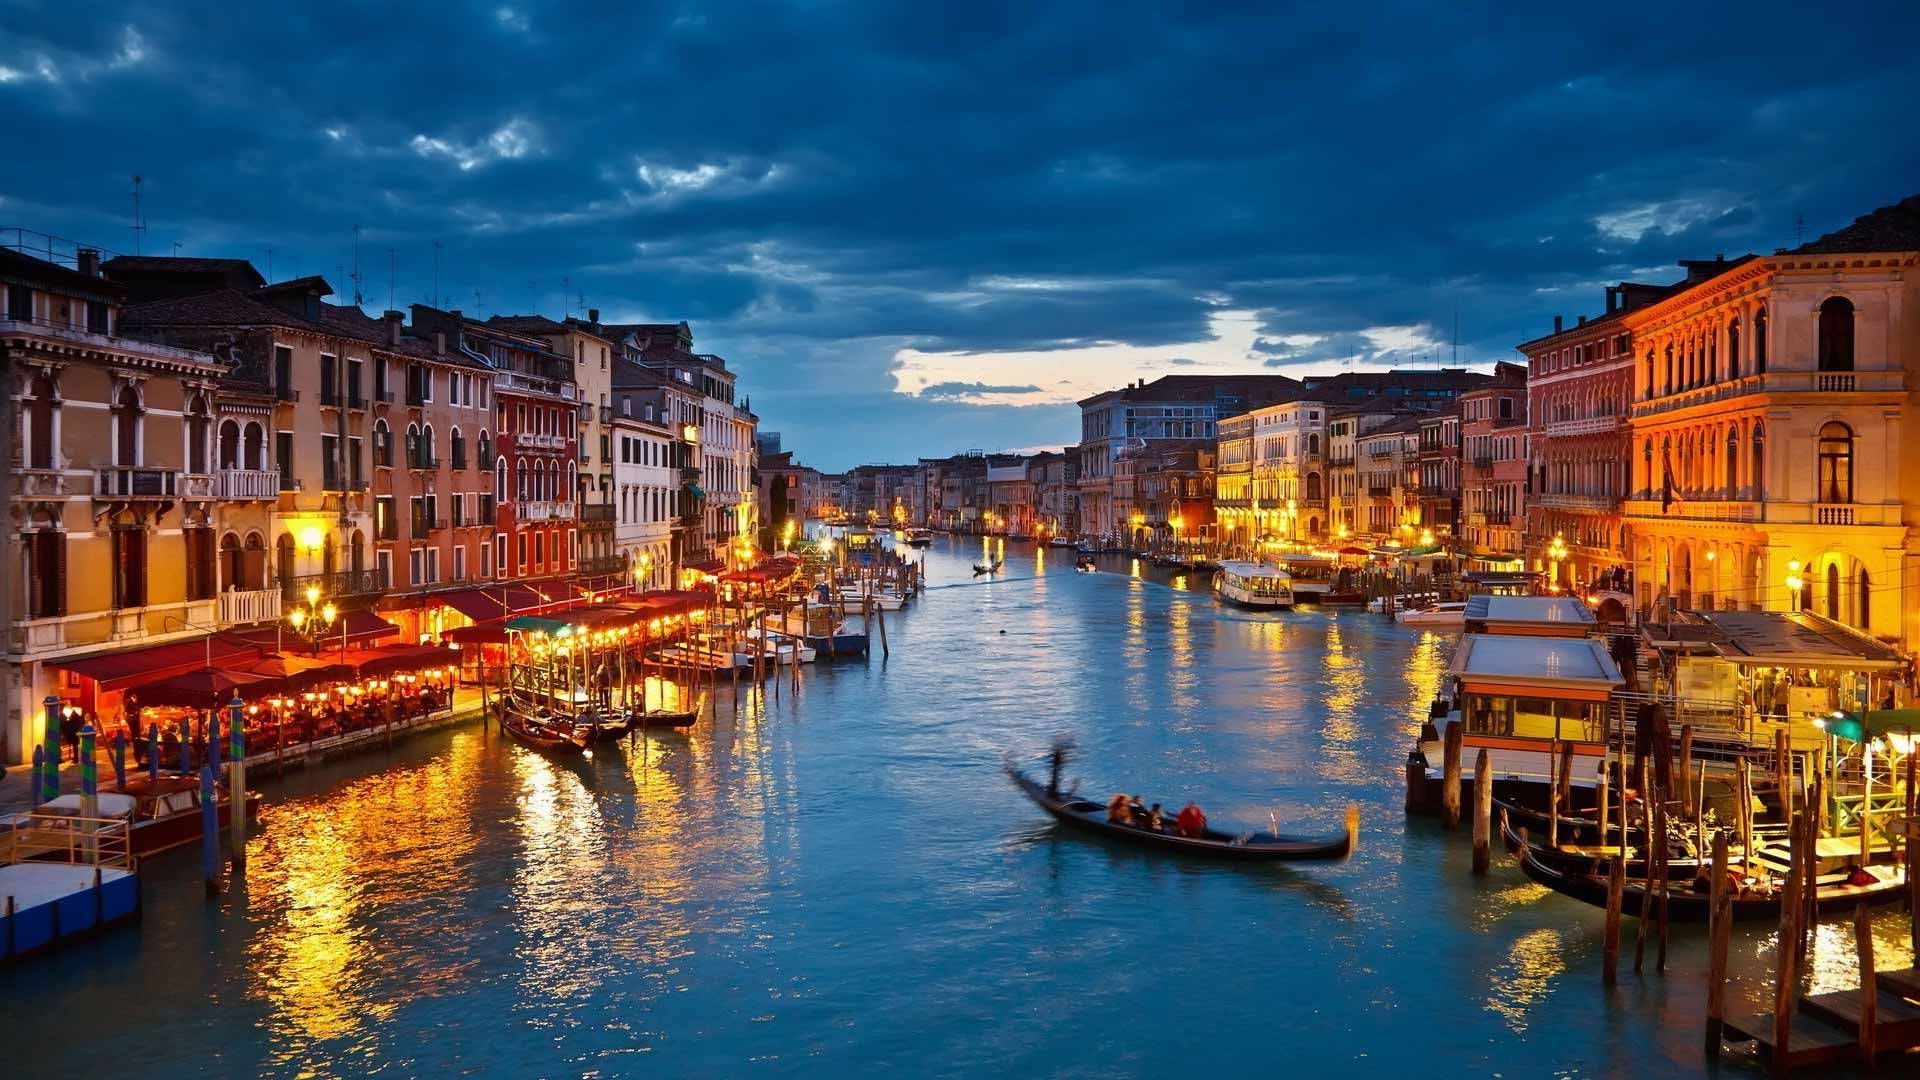 Download Europe's Famous City Venice Italy Wallpaper